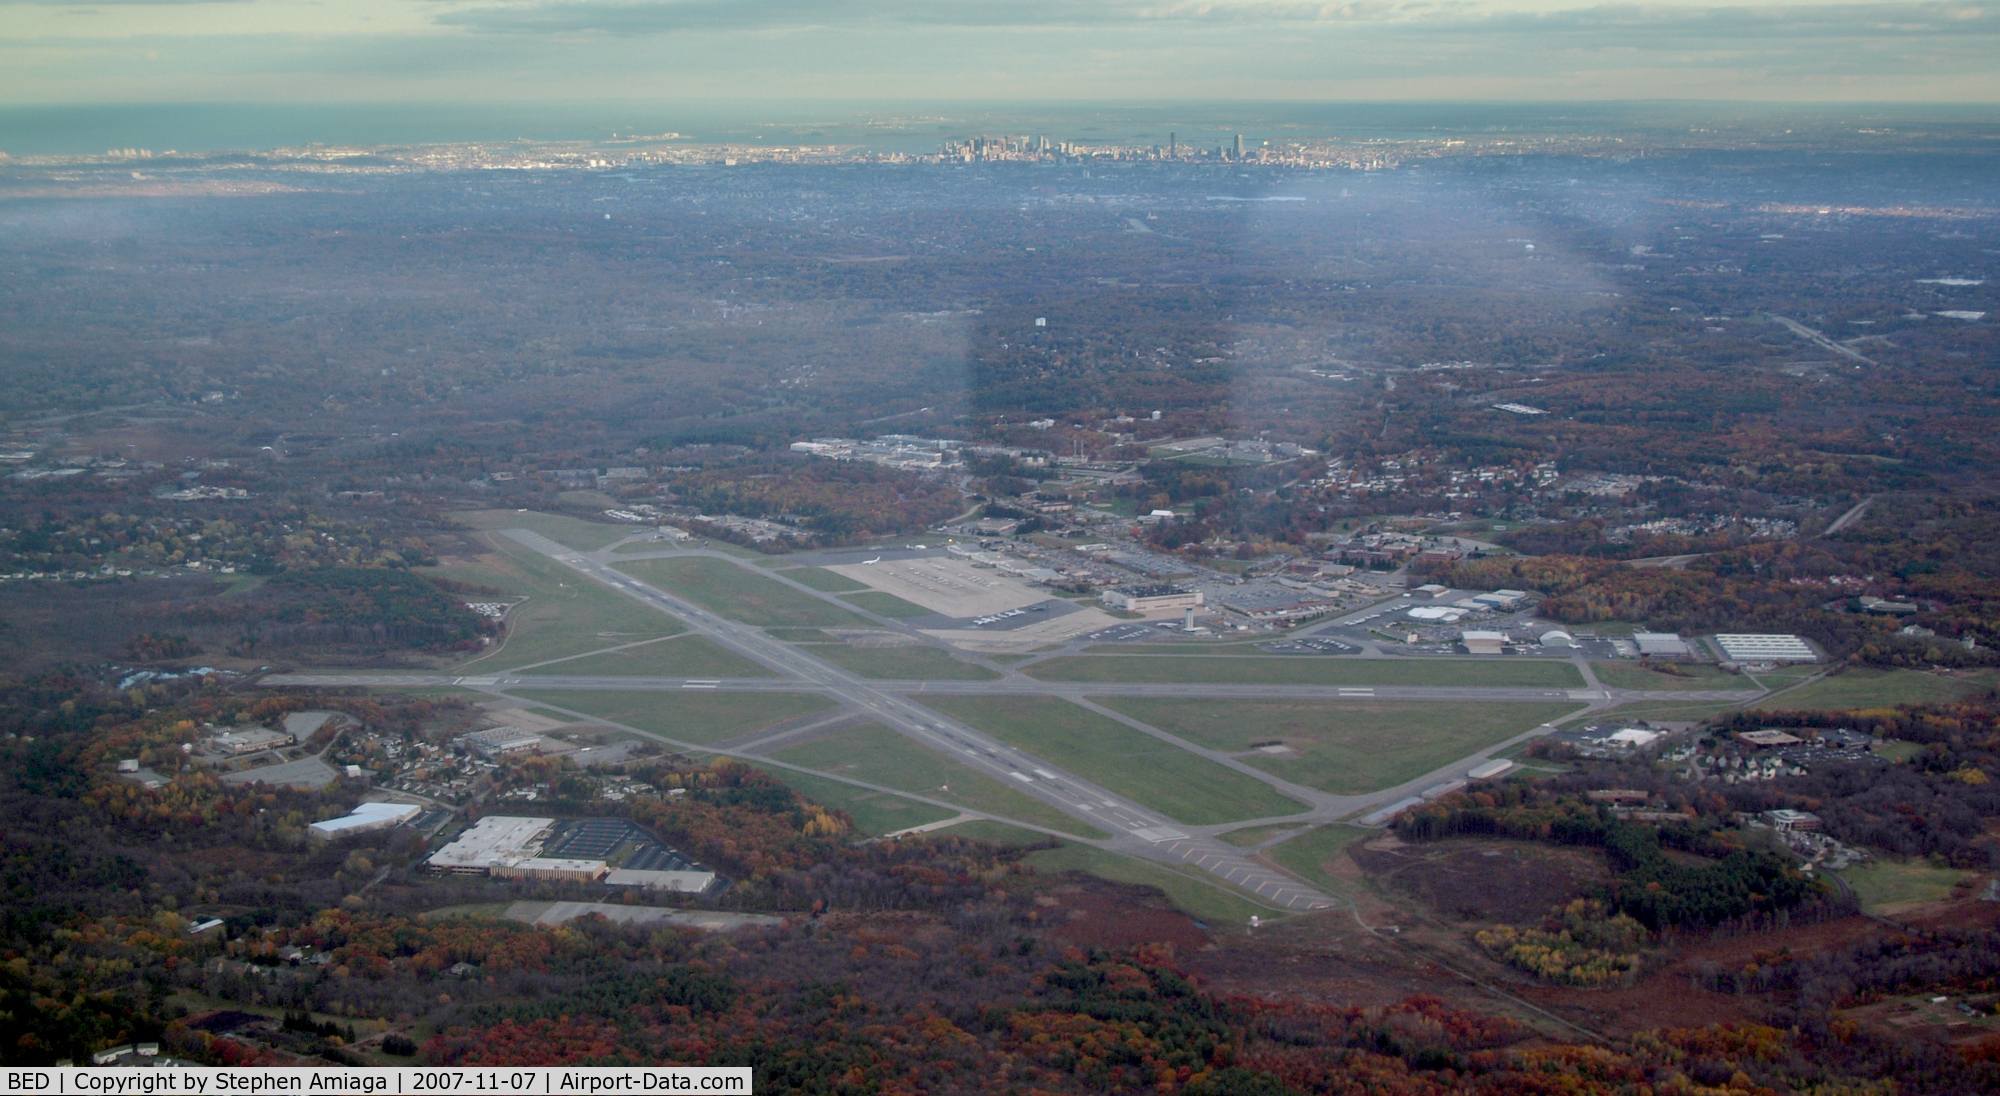 Laurence G Hanscom Fld Airport (BED) - Hanscom fm the W at 3000 MSL, Boston in distance